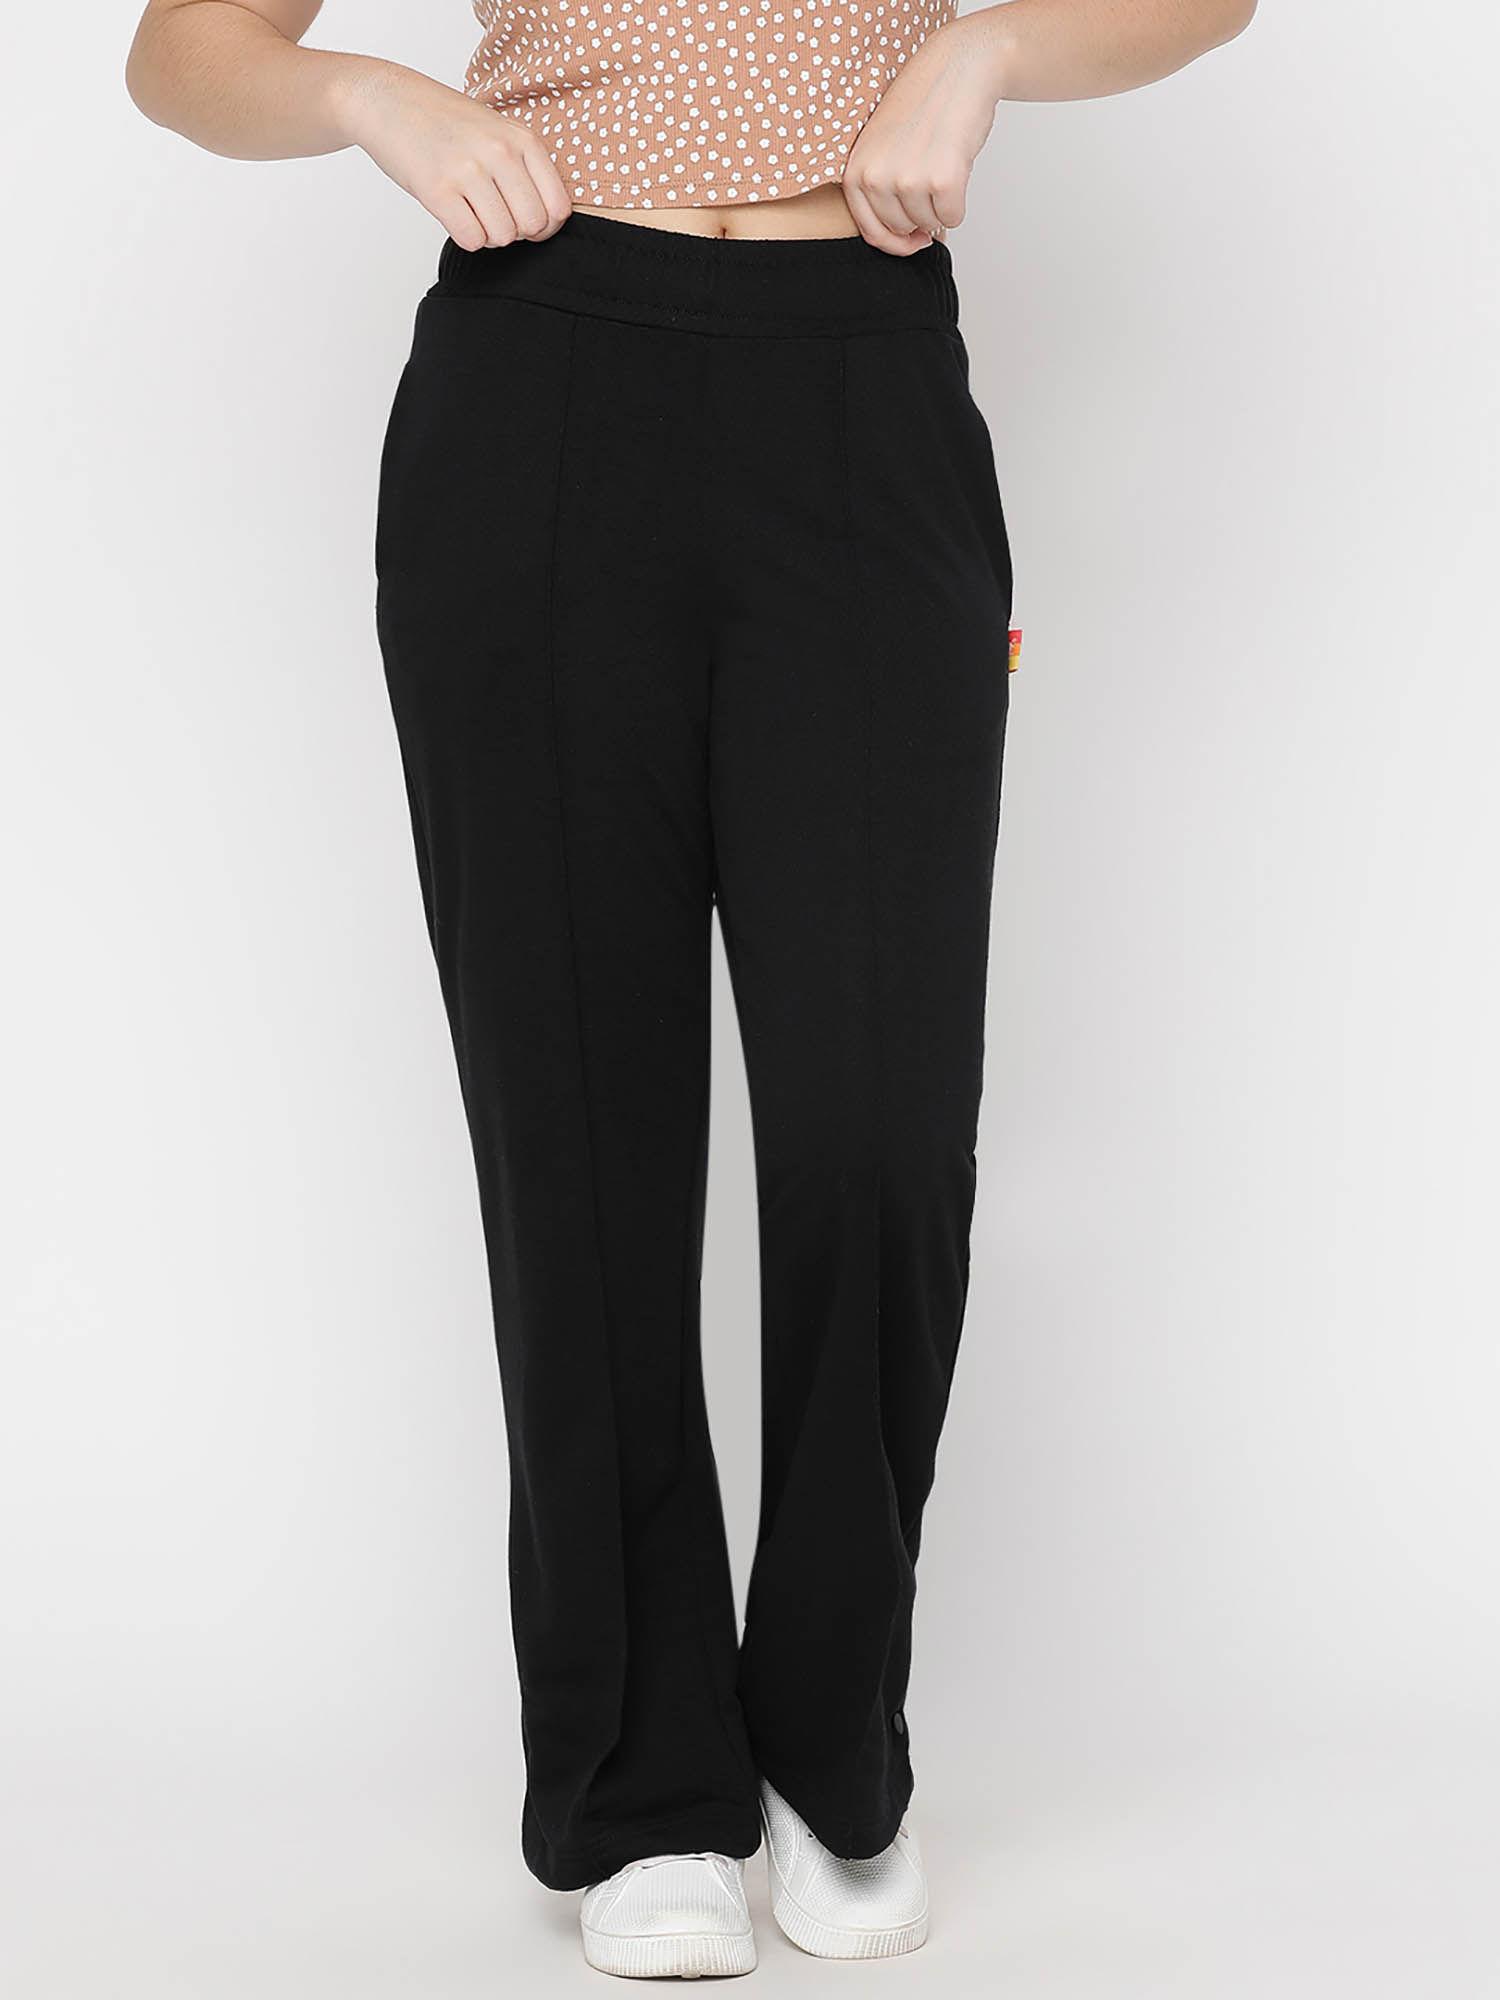 girls-solid-light-weight-cotton-looper-flared-trackpants-black